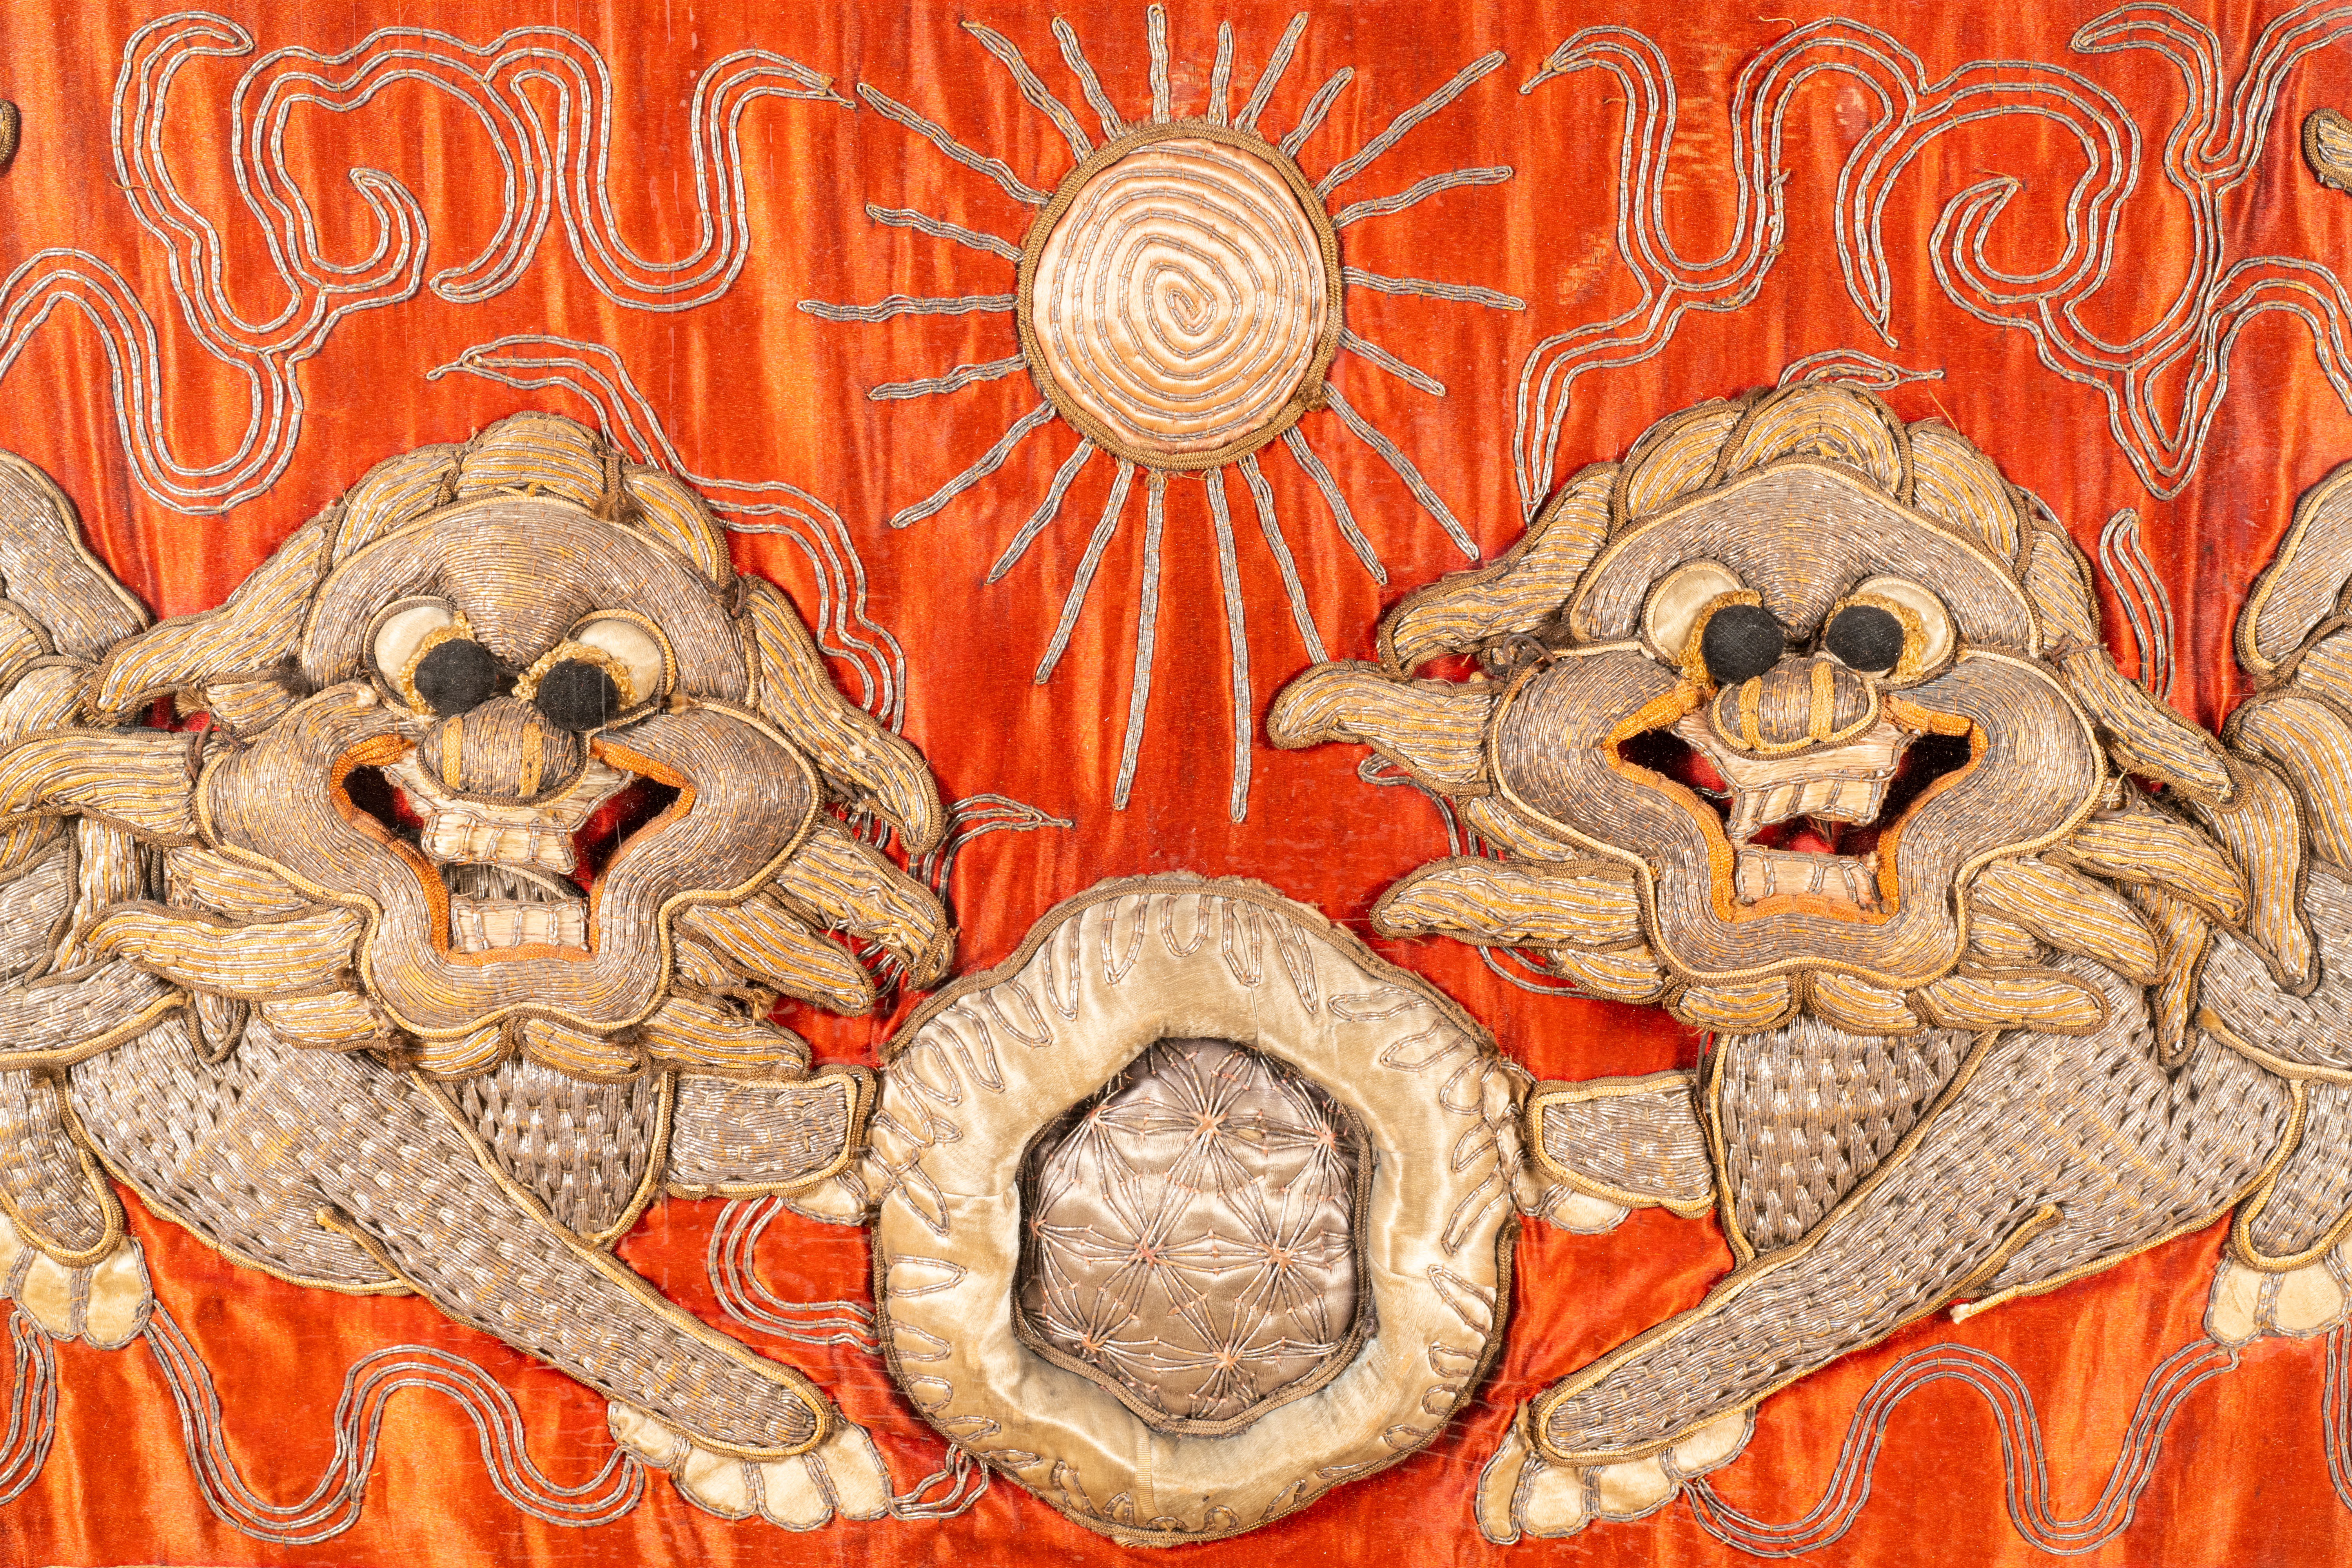 Two Chinese gold and silver-thread-embroidered silk cloths decorated with lions and Guandi, 19th C. - Image 3 of 8